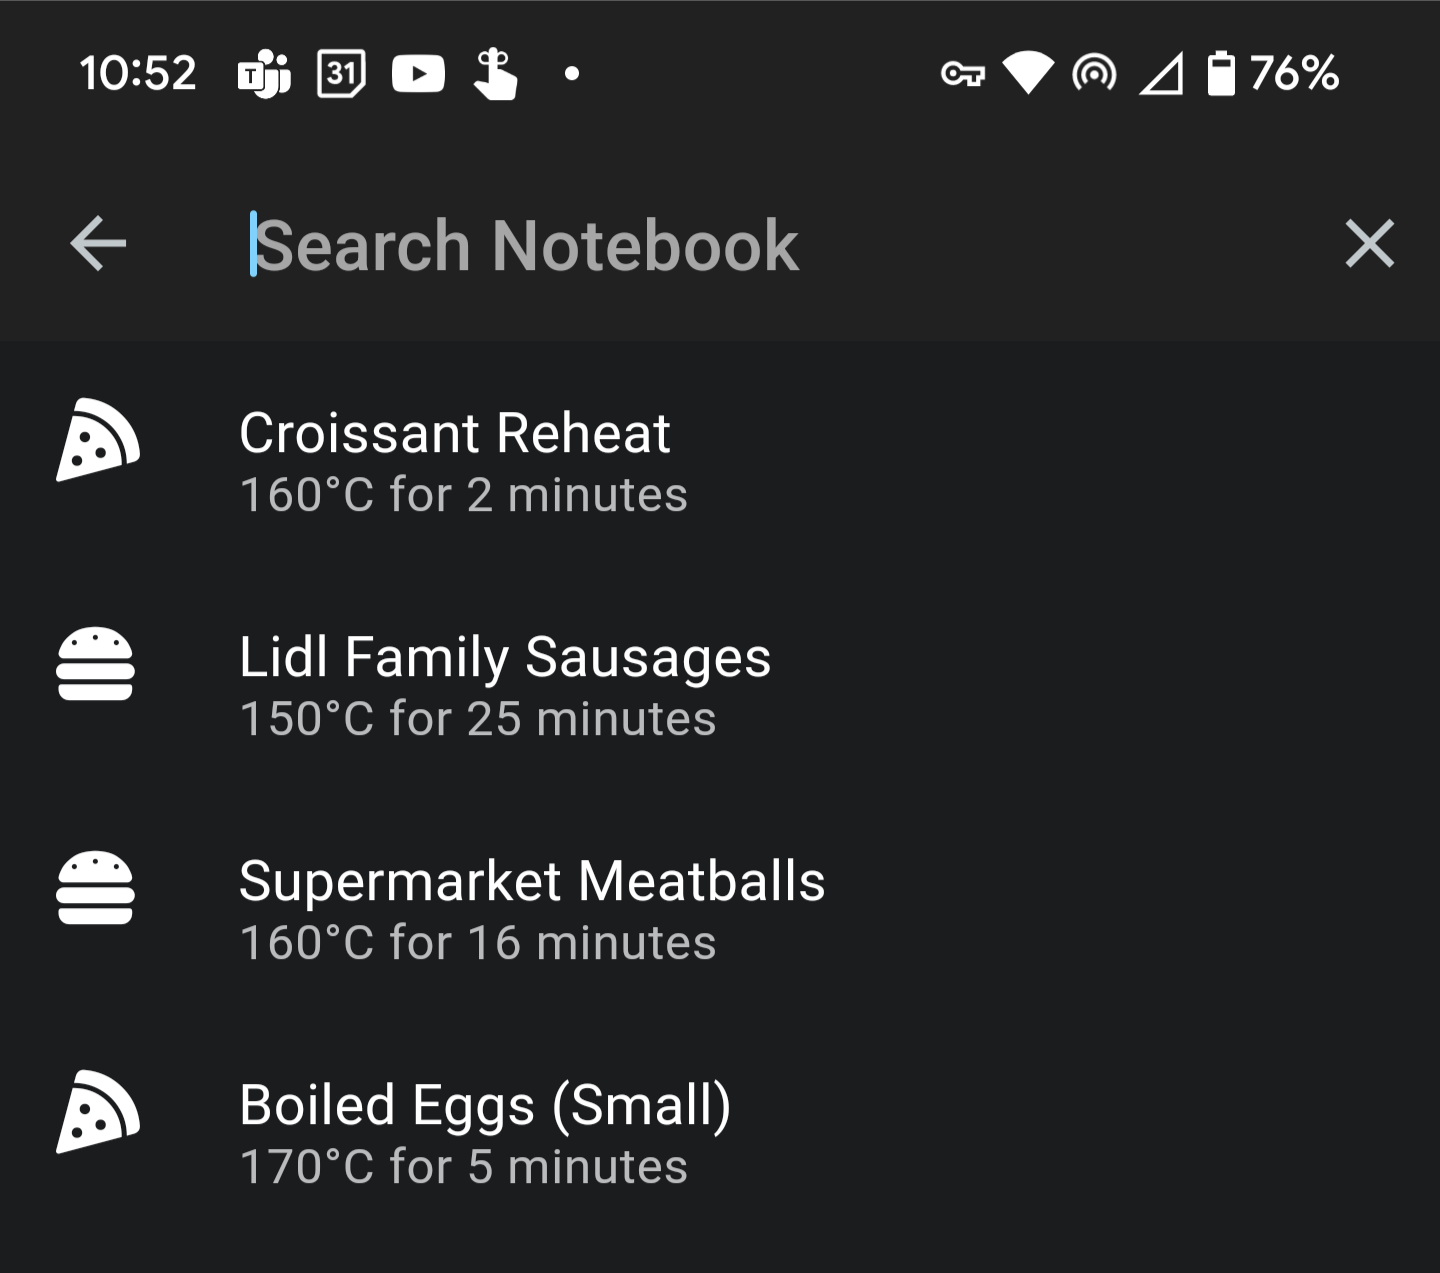 Notebook Search